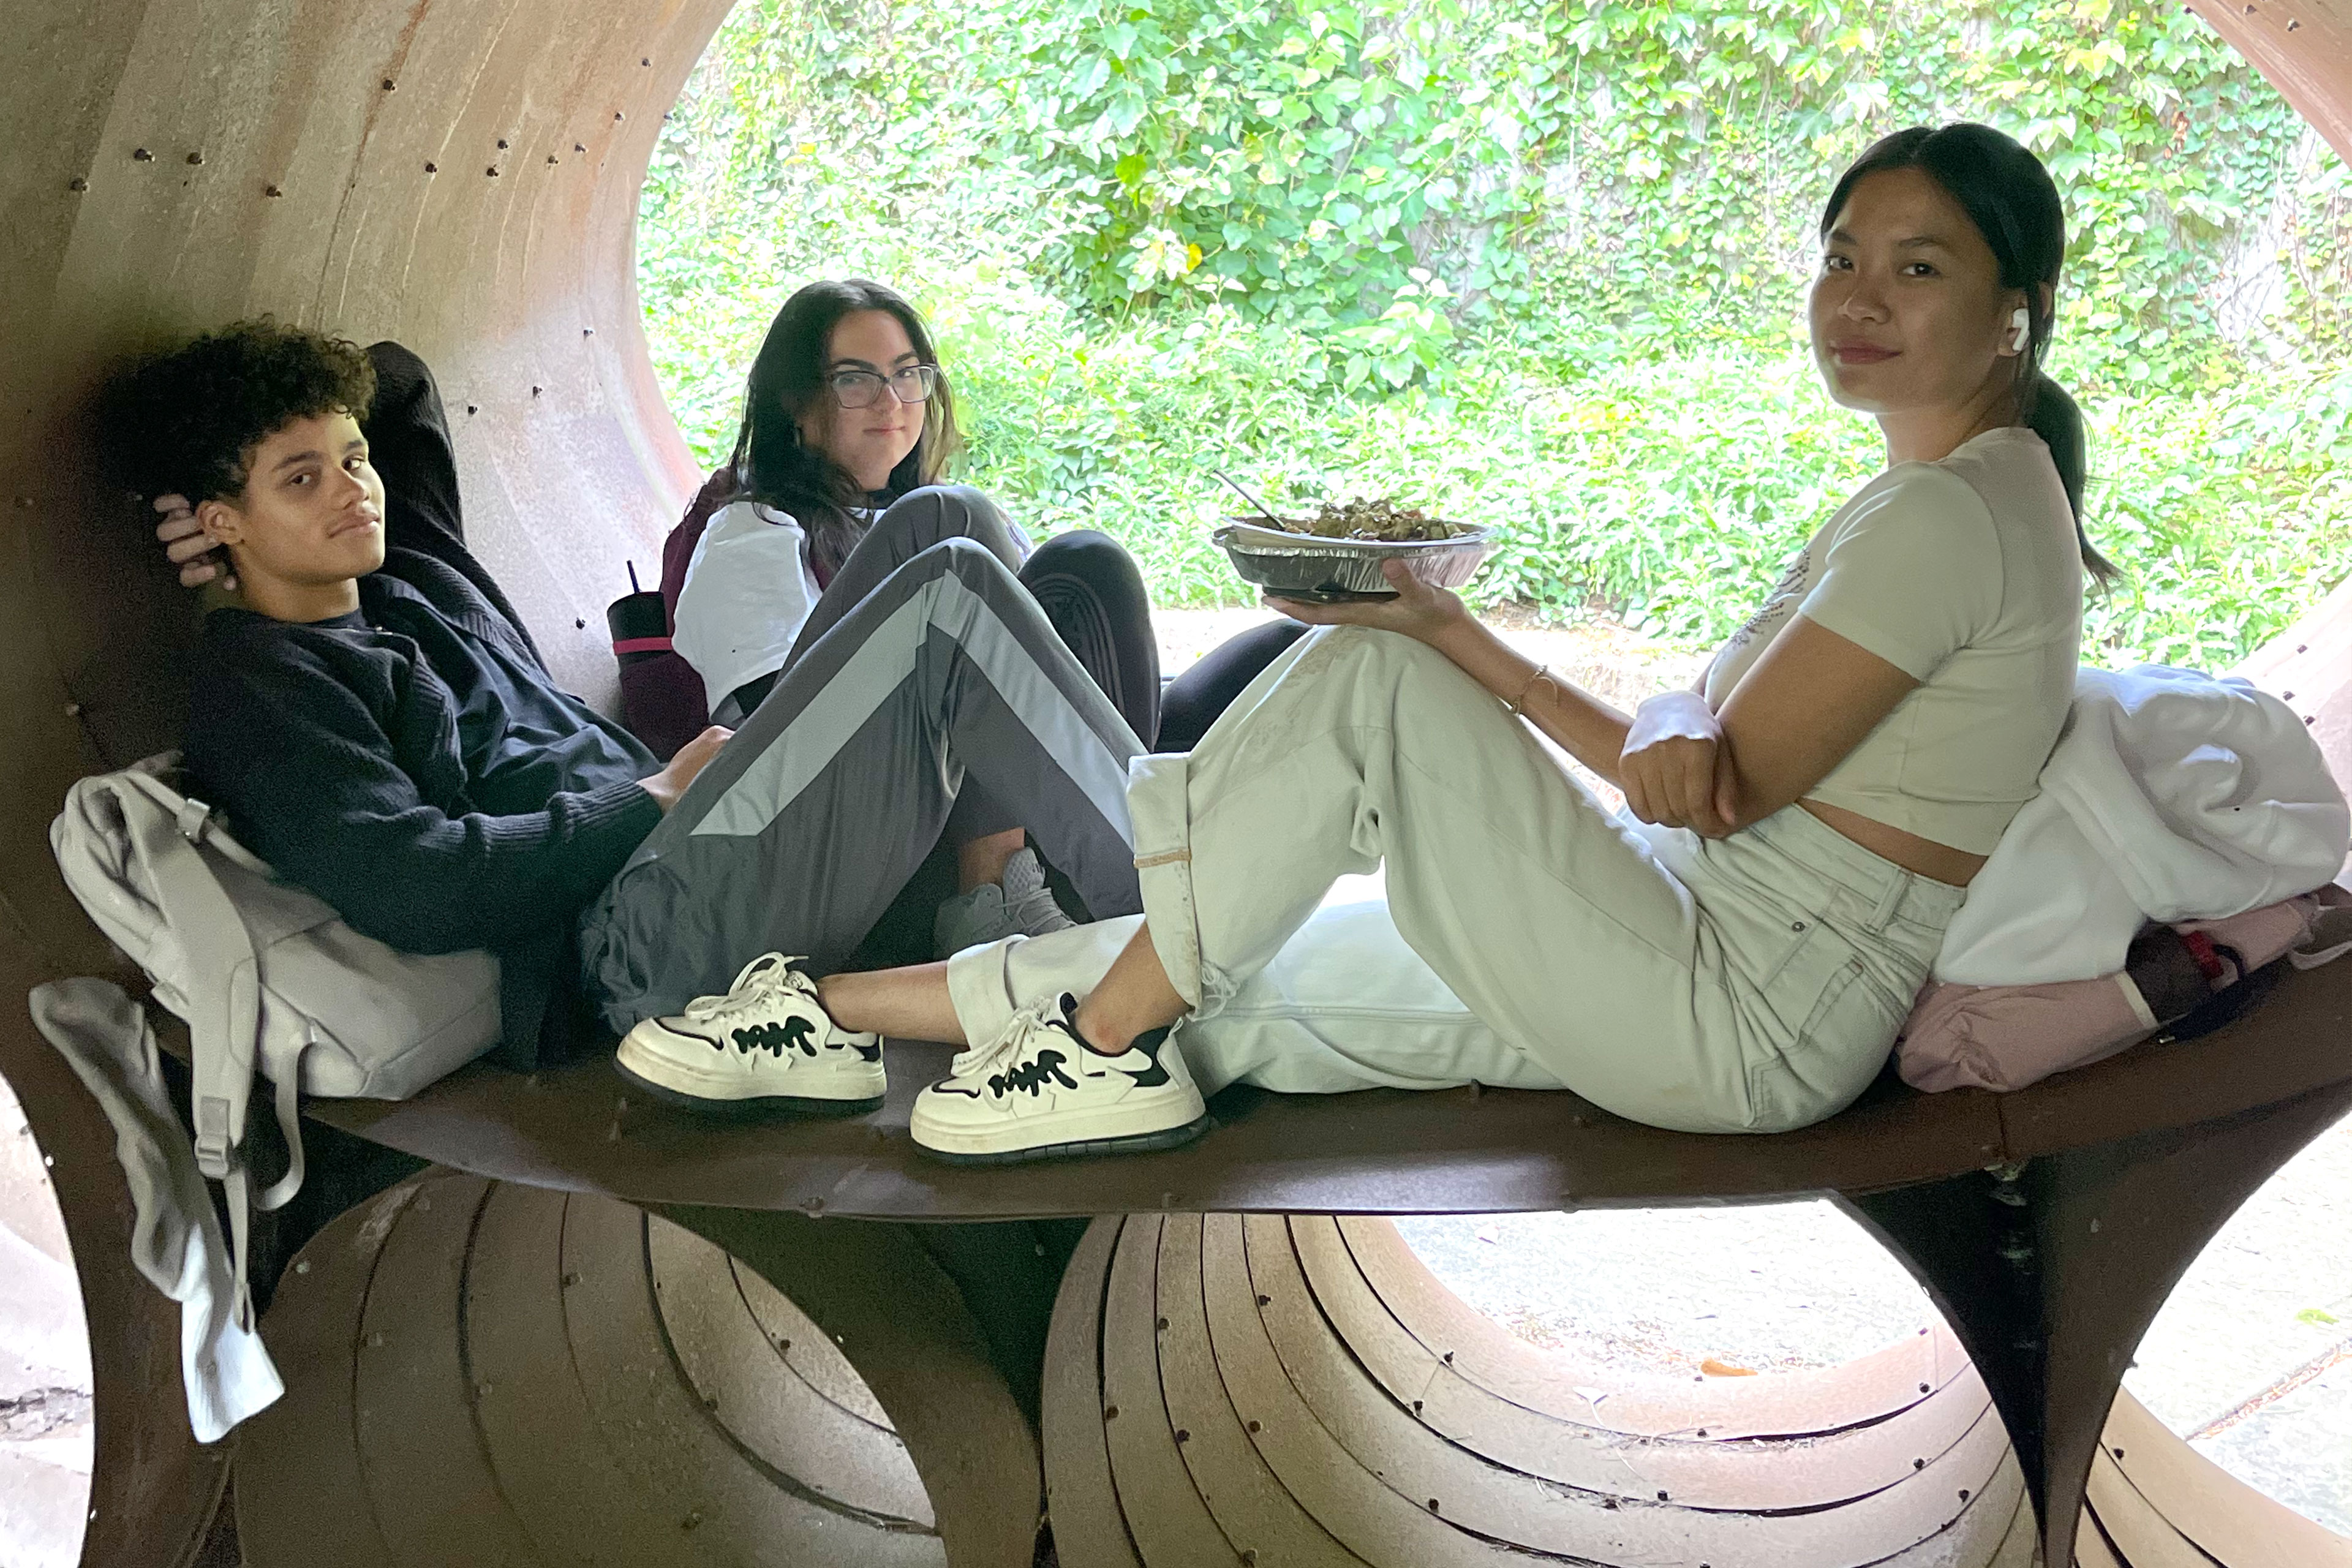 At last week's Club Fair, some students hung out near the quad, in Lehman's concave steel sculpture by DeWitt Godfrey. (Photo by Mildred Perez)